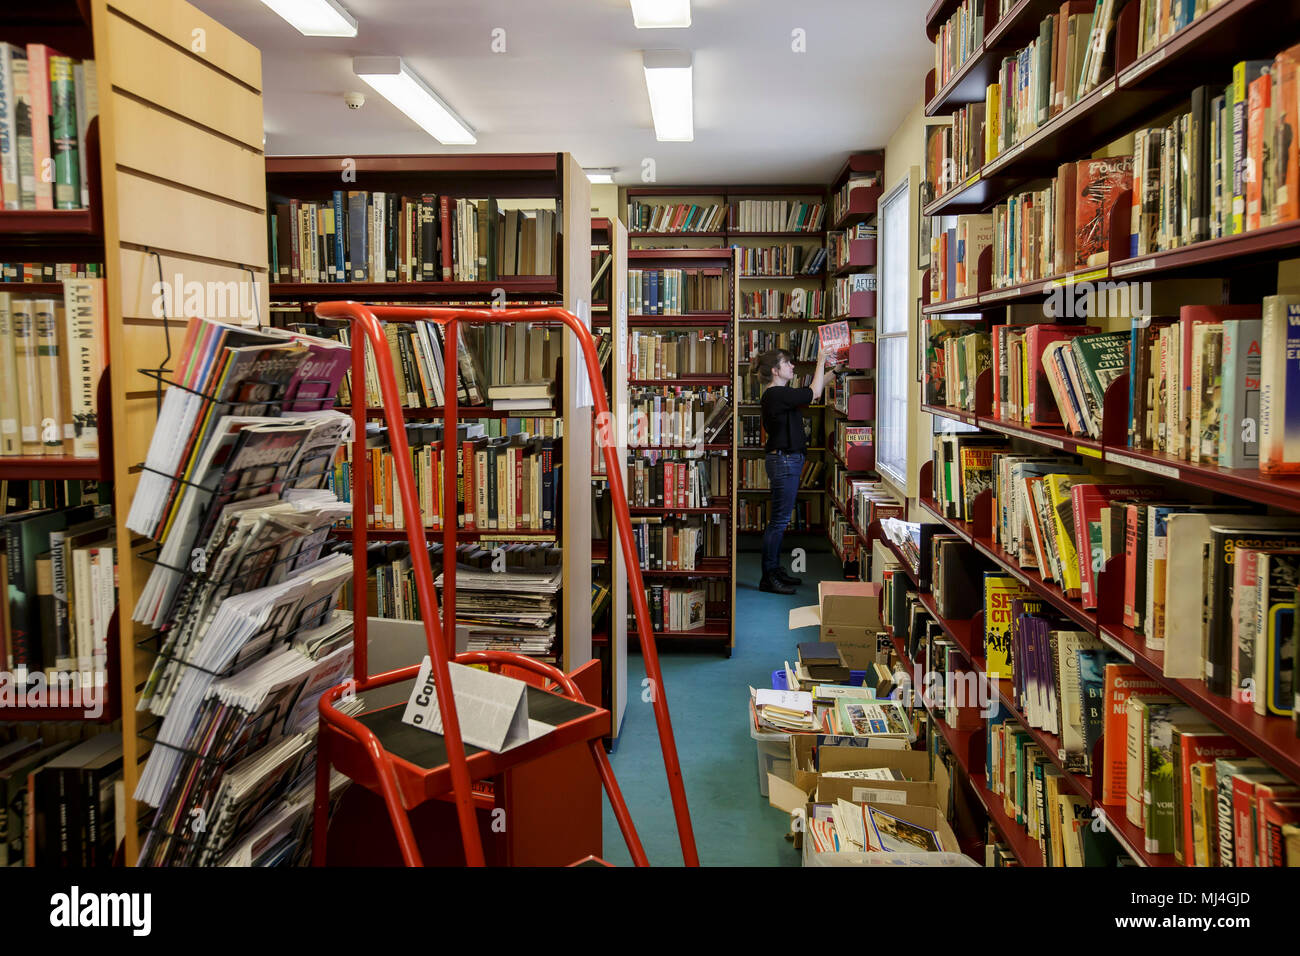 London, Britain. 4th May, 2018. A volunteer arrange books in the reading room of the Marx Memorial Library and Workers' School in London, Britain, May 4, 2018. Established in 1933 on the 50th anniversary of the death of Marx, the Marx Memorial Library and Workers' School has been the intellectual home of generations of scholars interested in studying Marxism, trade unionism, and the working class movement. Credit: Tim Ireland/Xinhua/Alamy Live News Stock Photo